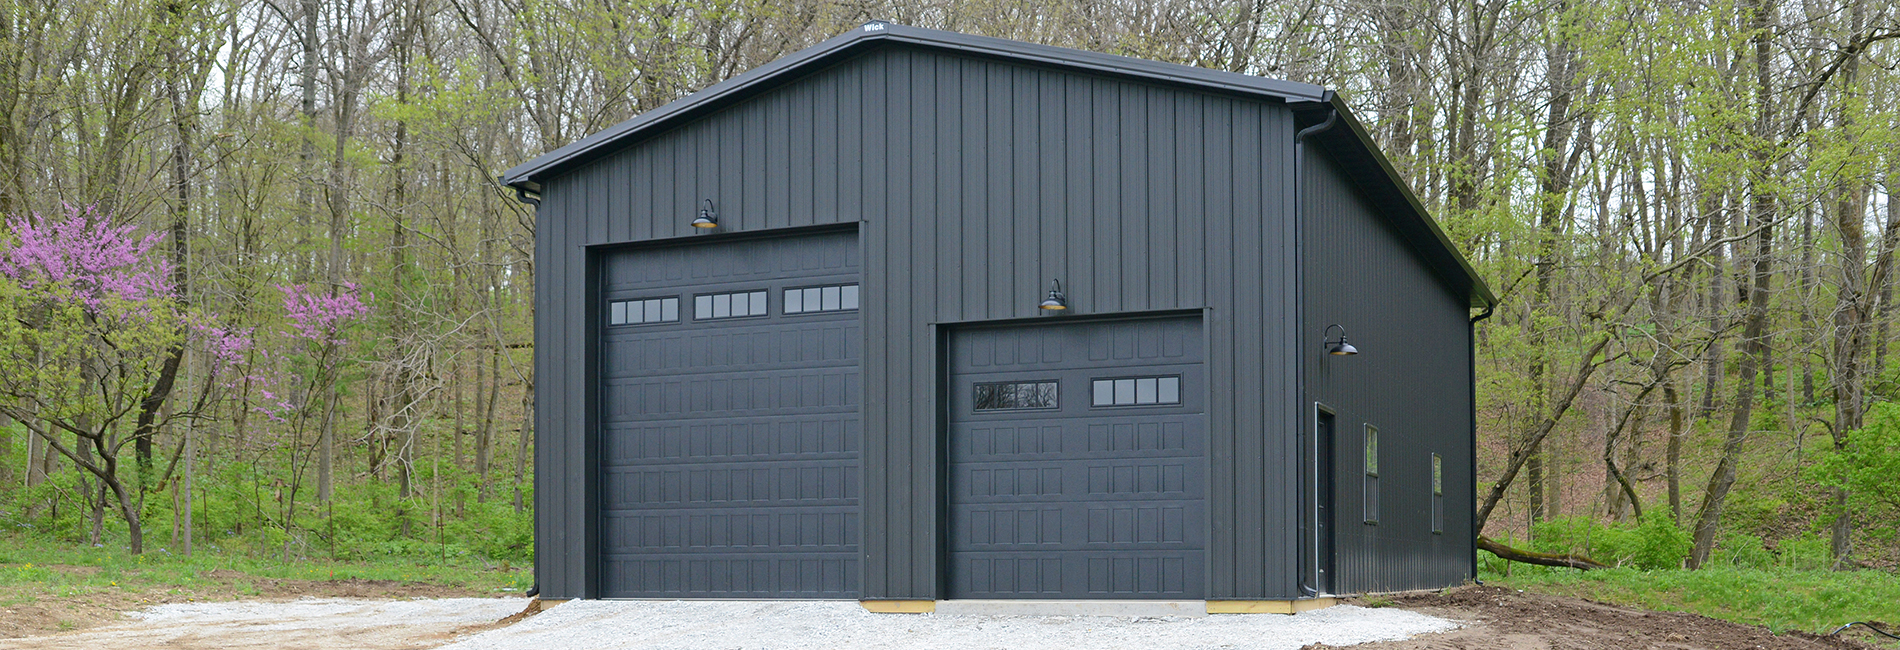 Residential Pole Barn Garages, Shops and sheds